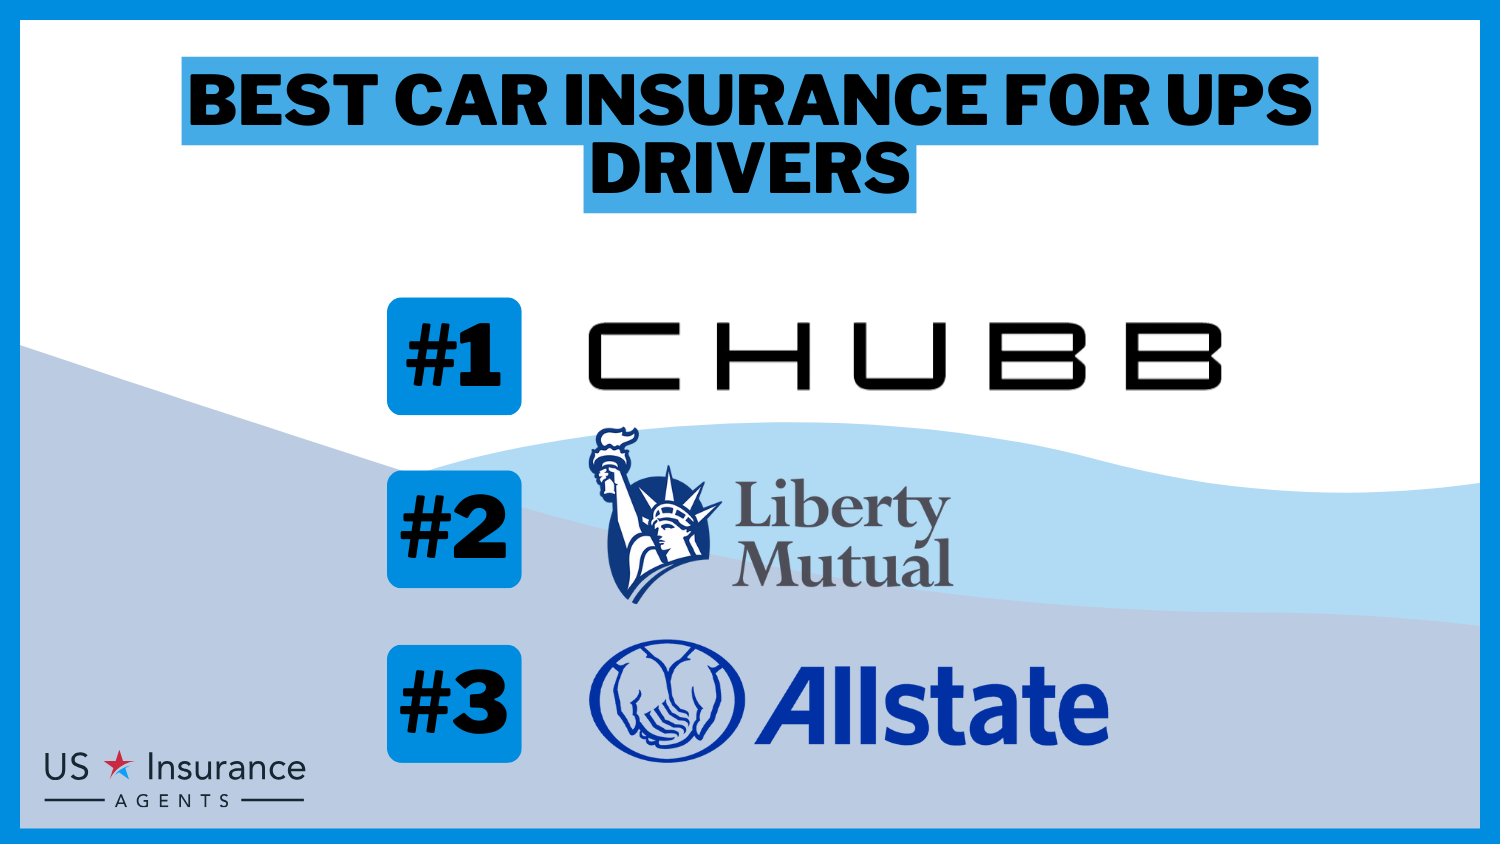 Best Car Insurance for UPS Drivers: Chubb, Liberty Mutual, and Allstate